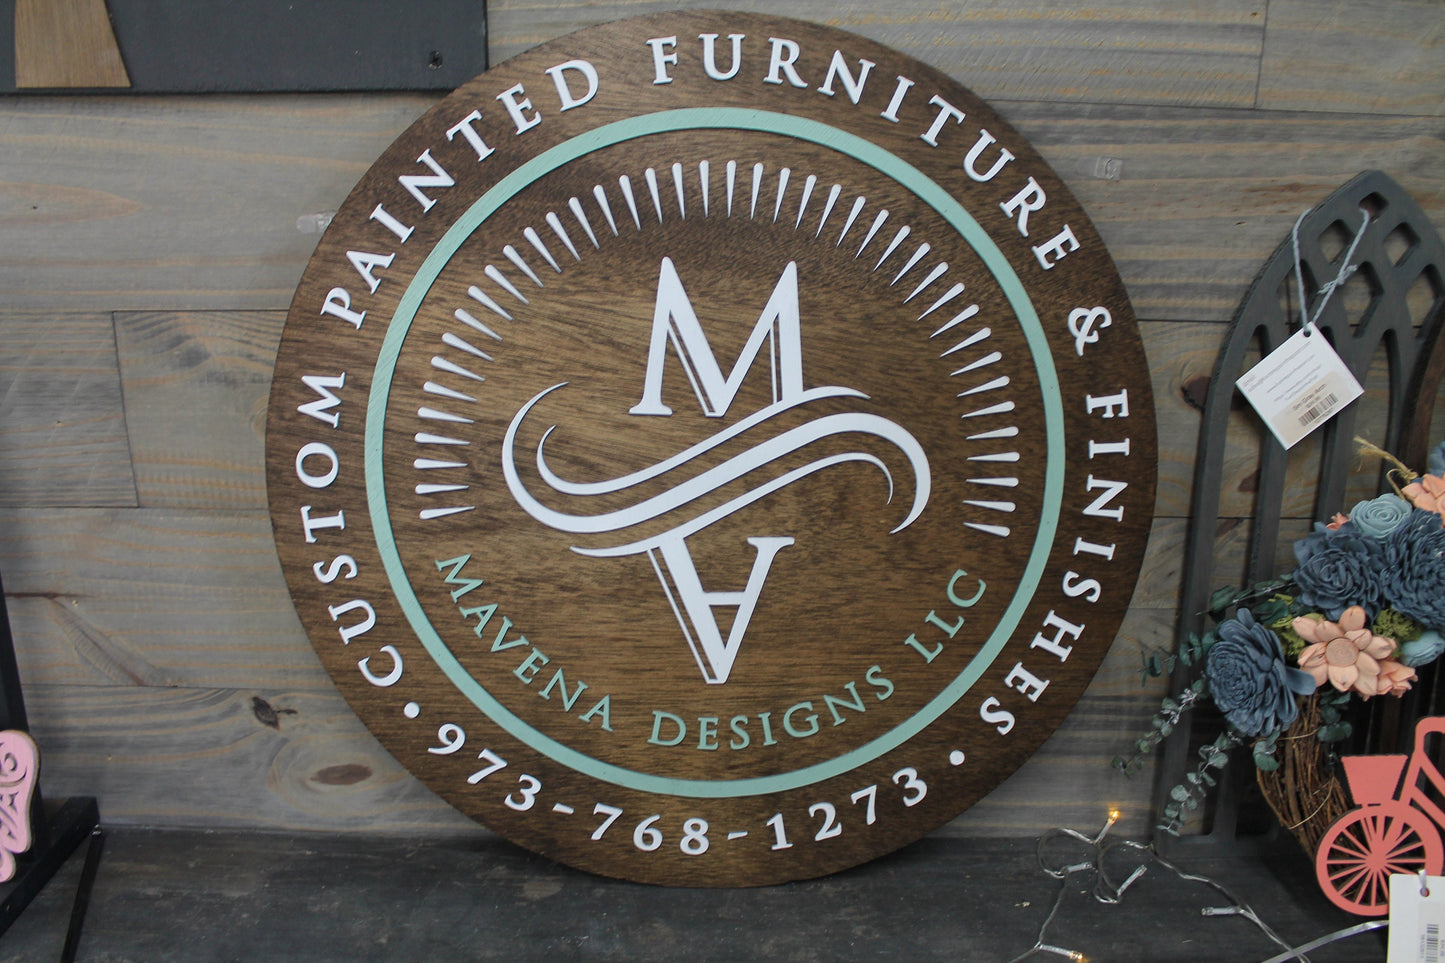 Custom sign logo sign business sign custom quote sign personalized sign salon sign furniture store studio sign for home layered sign wooden